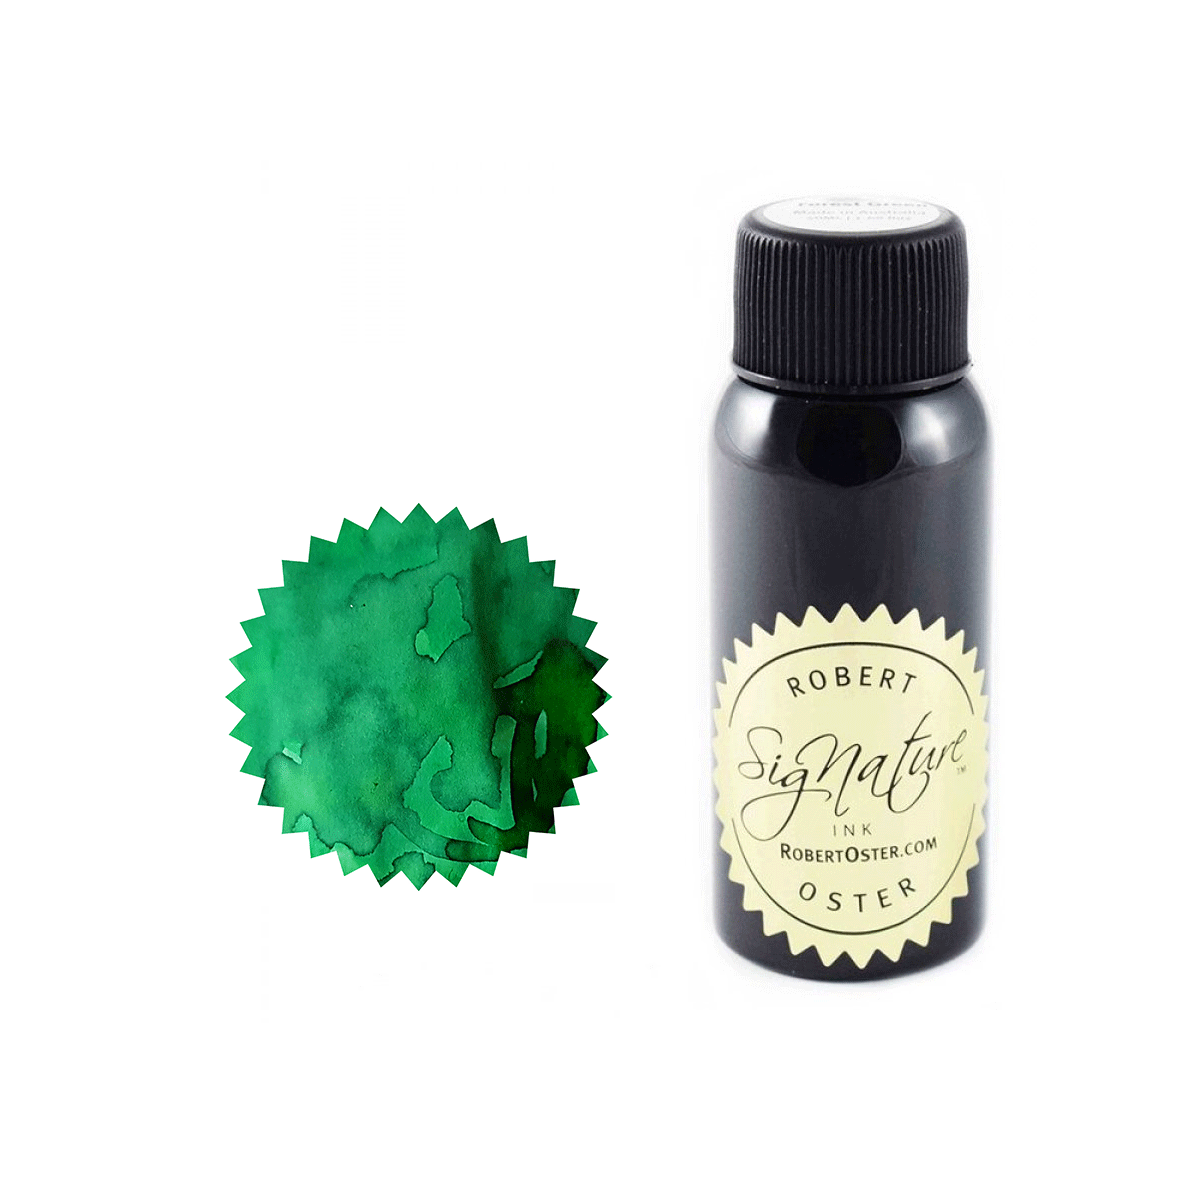 Robert Oster Signature Ink Bottle Ever Green - Pencraft the boutique